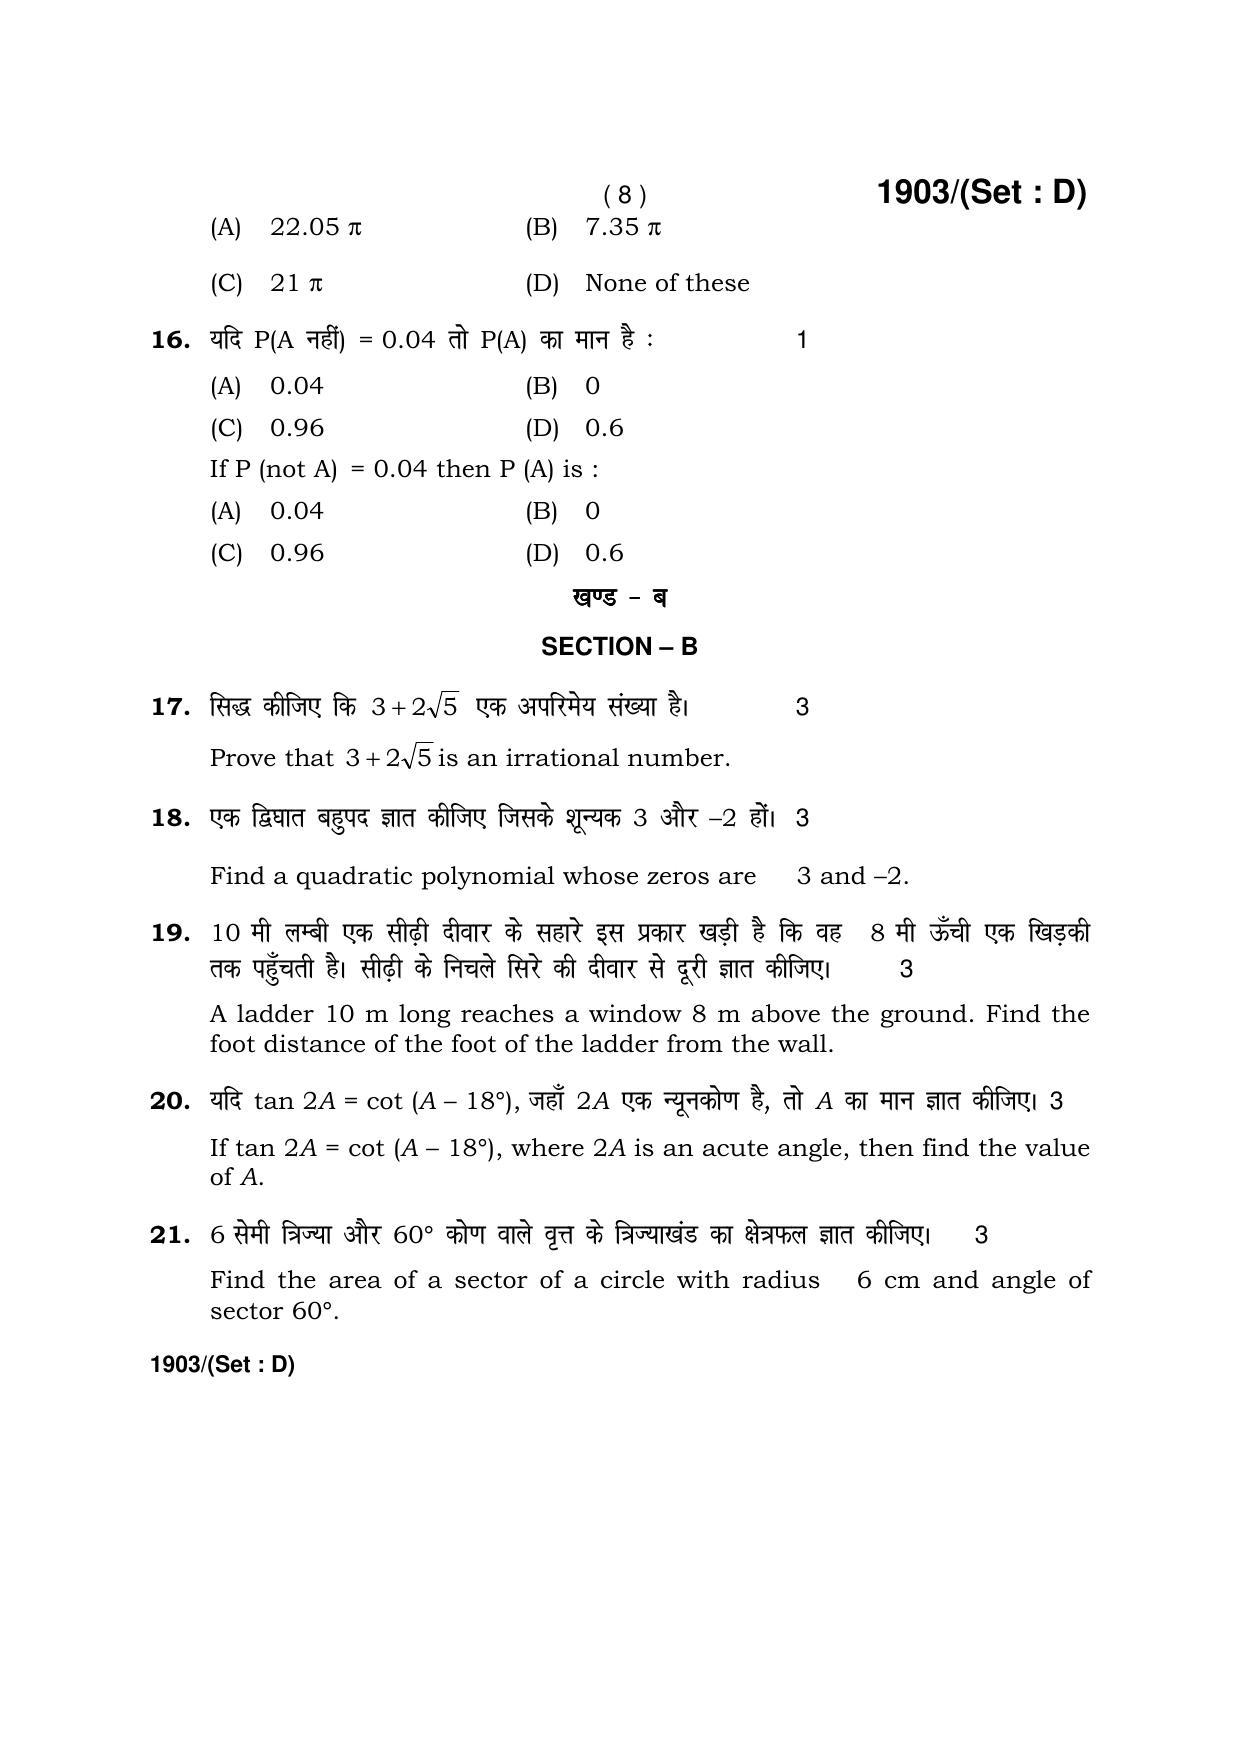 Haryana Board HBSE Class 10 Mathematics -D 2017 Question Paper - Page 8